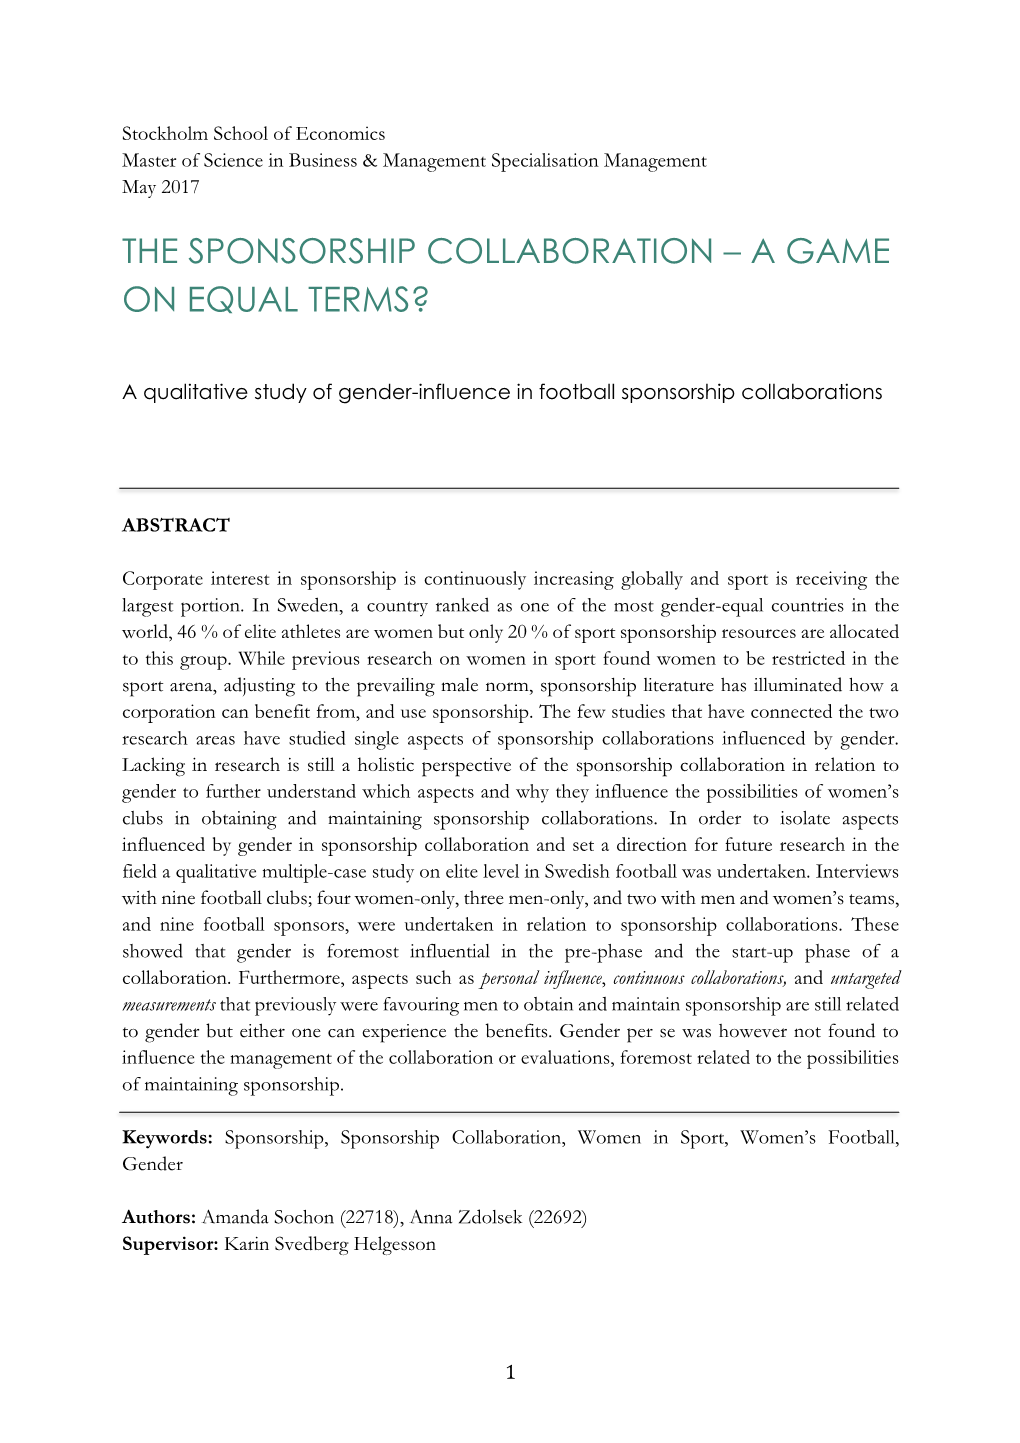 The Sponsorship Collaboration – a Game on Equal Terms?